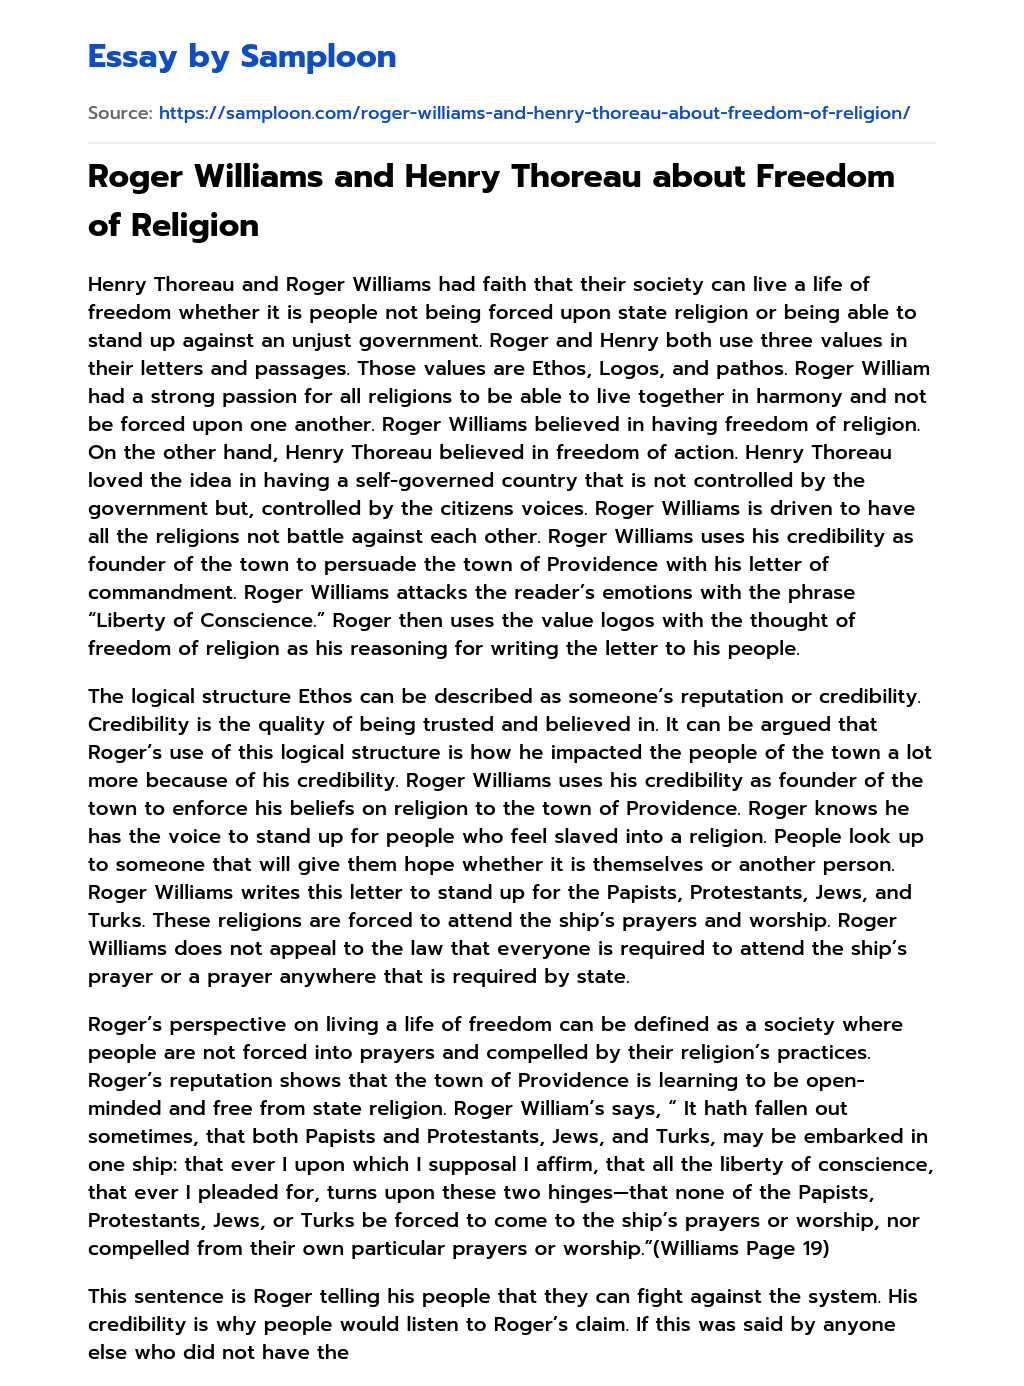 Roger Williams and Henry Thoreau about Freedom of Religion essay